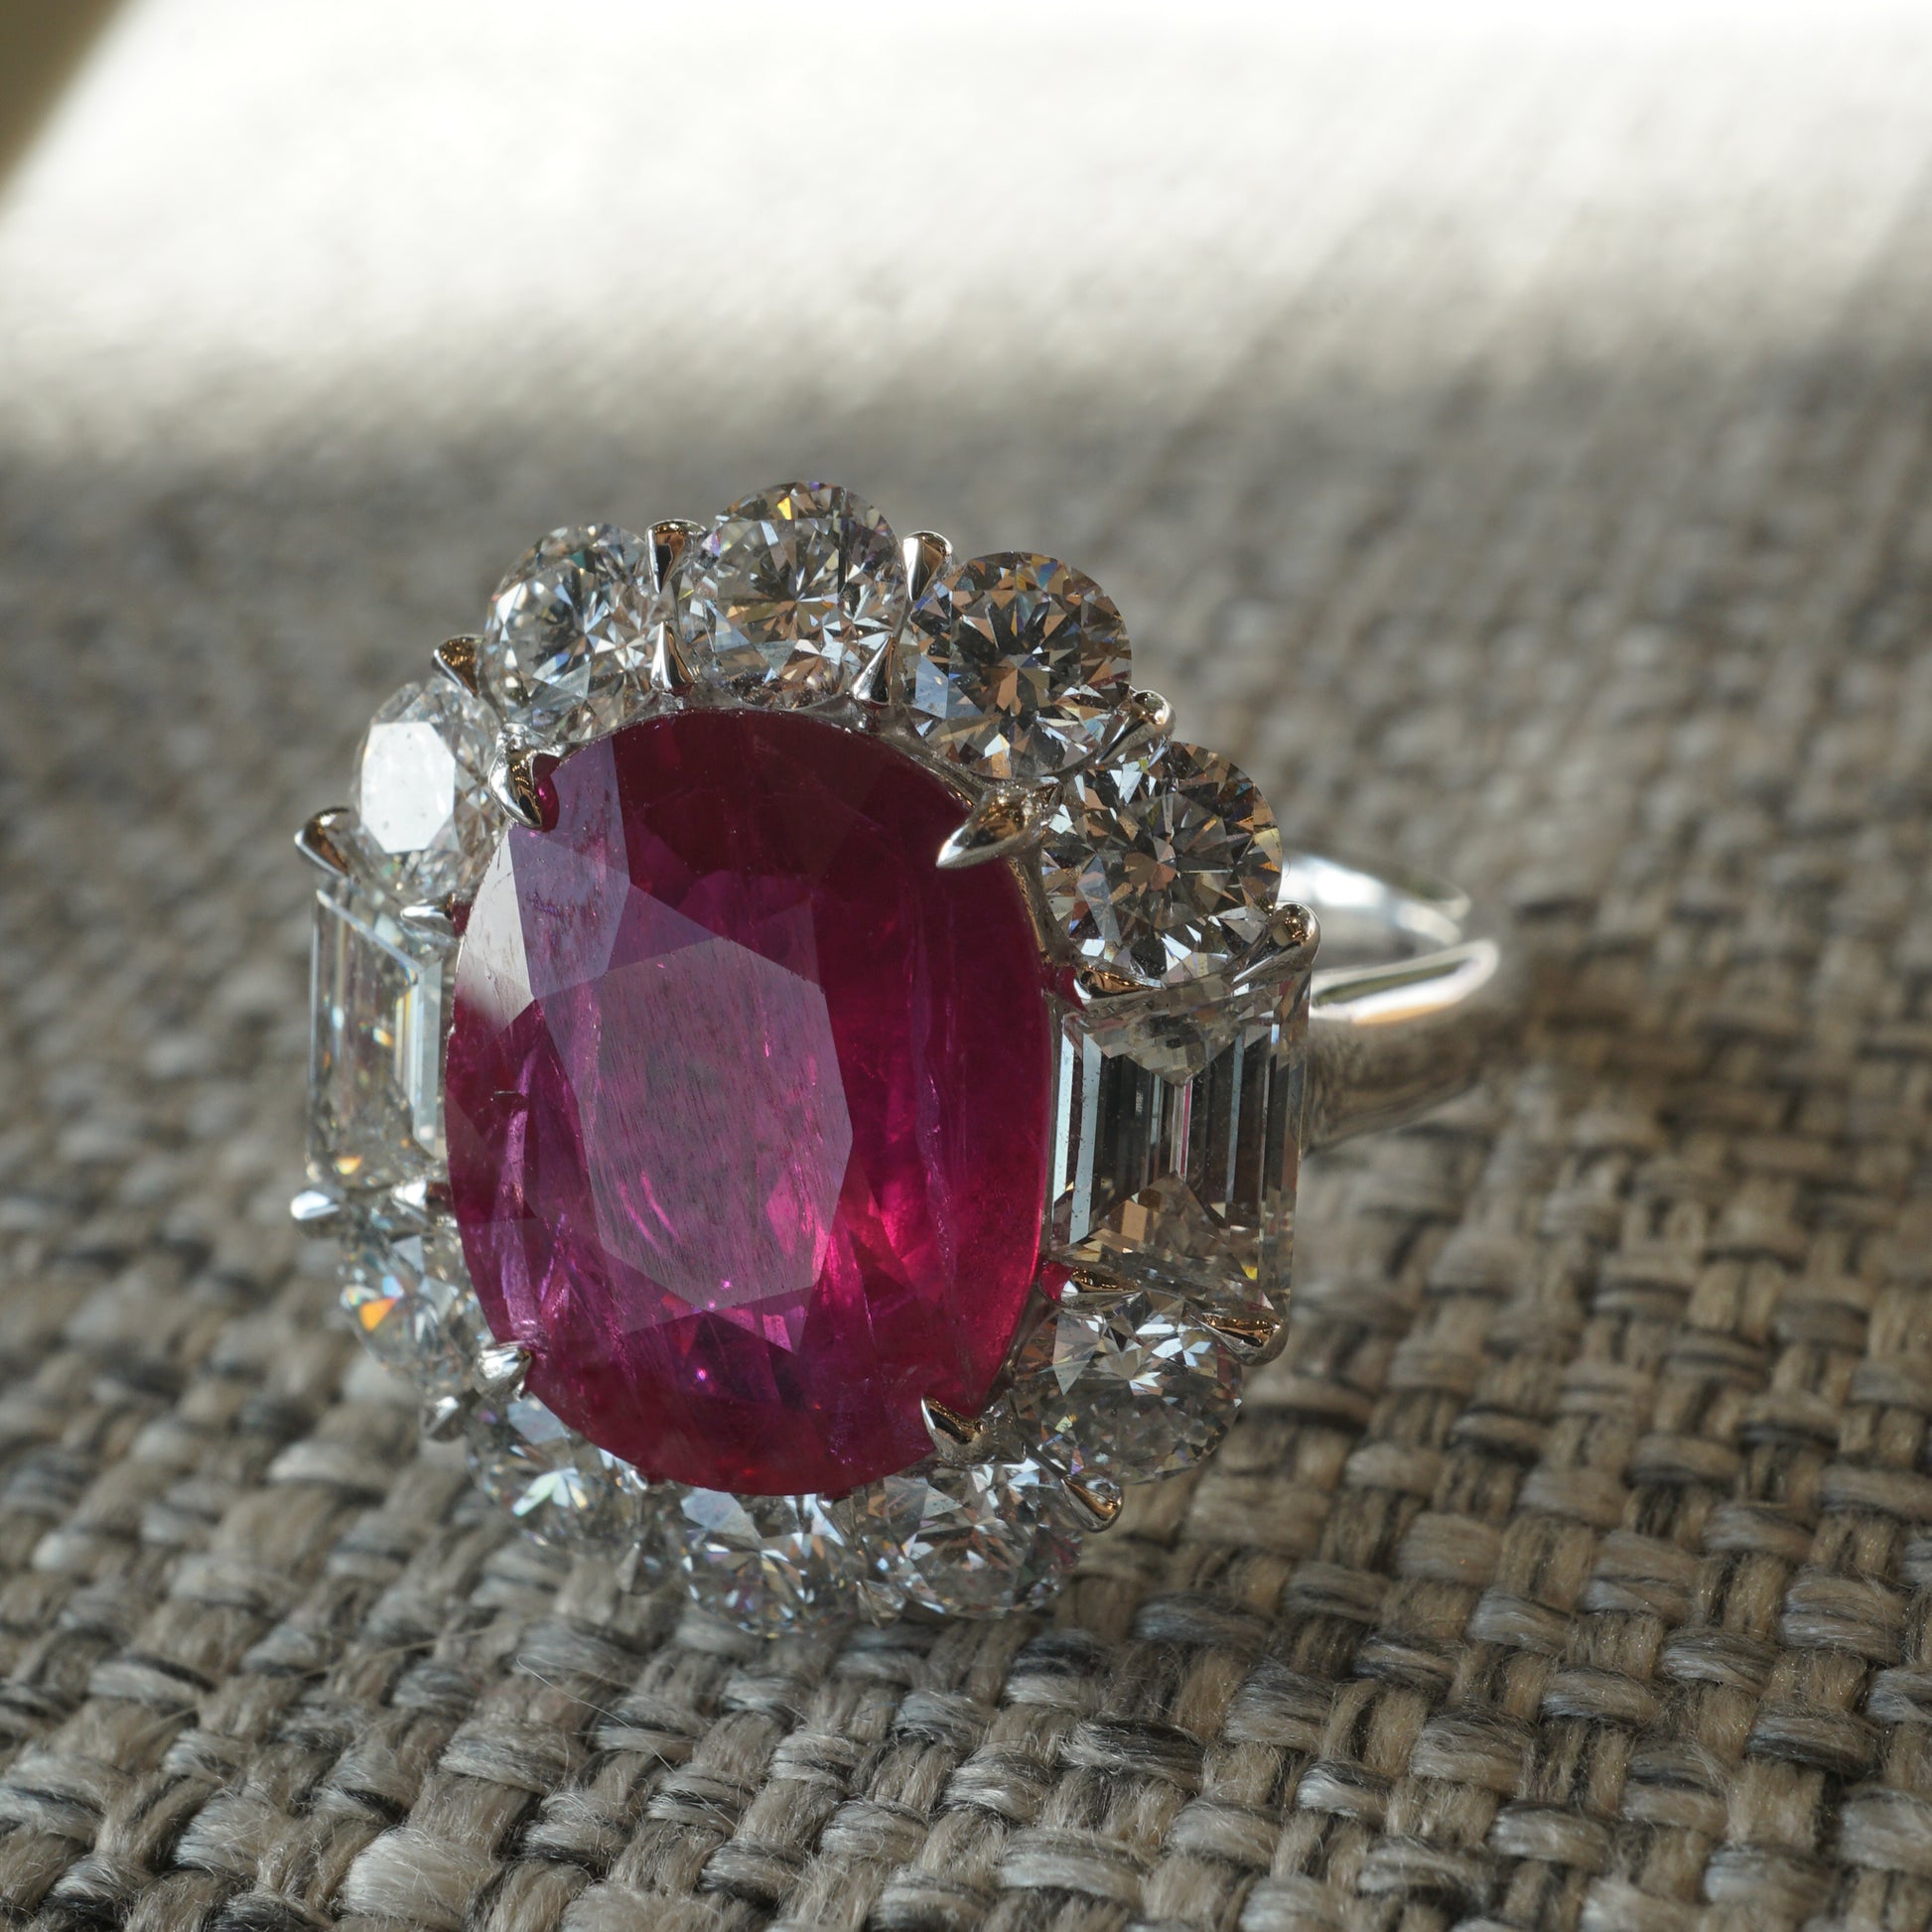 Cushion Cut Ruby & Diamond Cocktail Ring in PlatinumComposition: PlatinumRing Size: 6.25Total Diamond Weight: 2.65 ctTotal Gram Weight: 9.04 gInscription: PLAT SOPHIA D. 3855C R 4.77 D 0.83 1.82